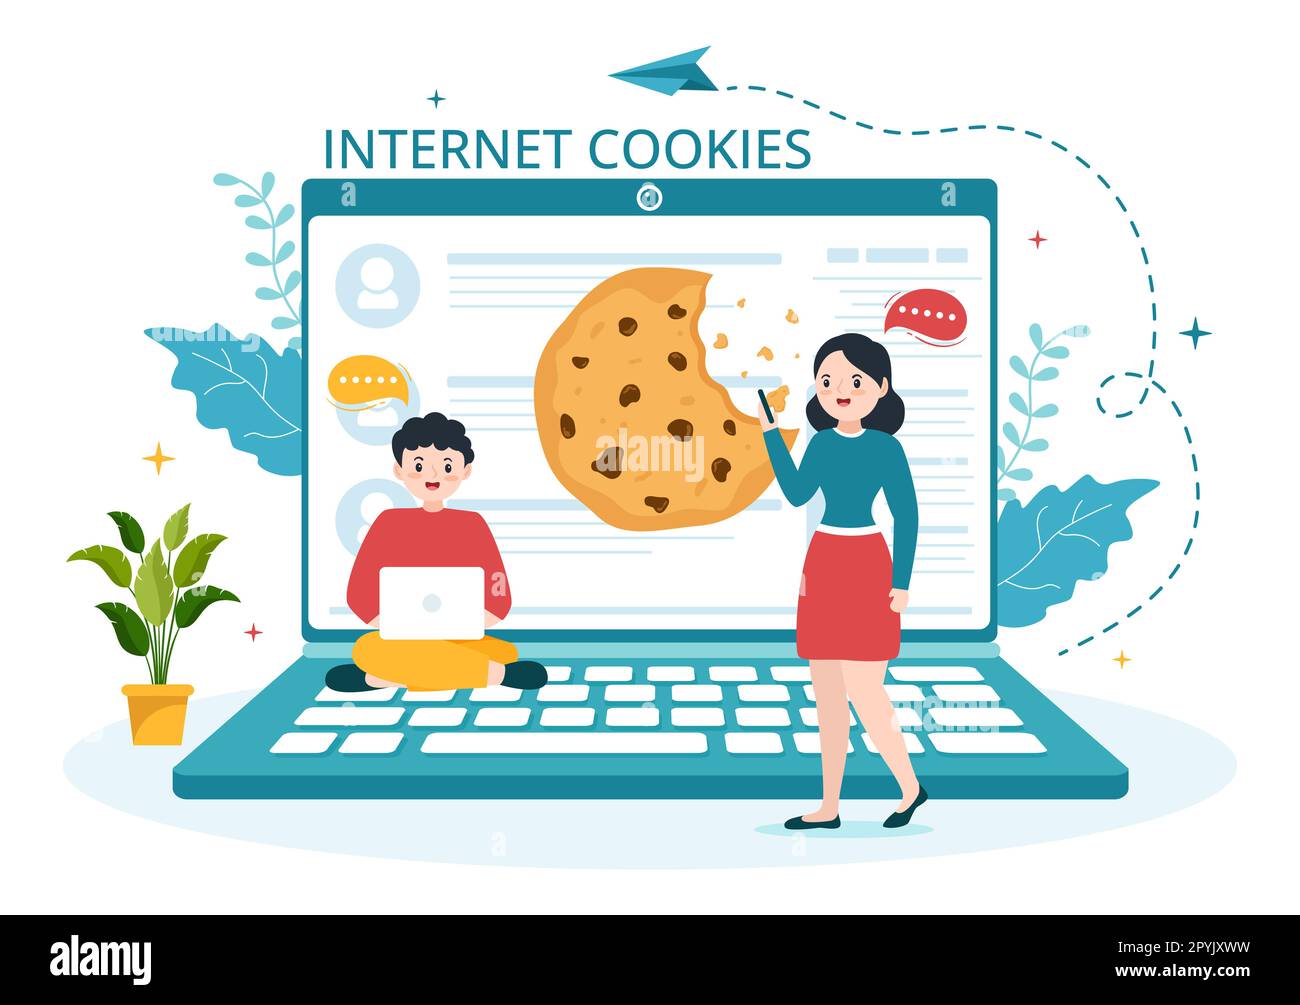 Internet Cookies Technology Illustration with Track Cookie Record of Browsing a Website in Flat Cartoon Hand Drawn Landing Page Templates Stock Photo